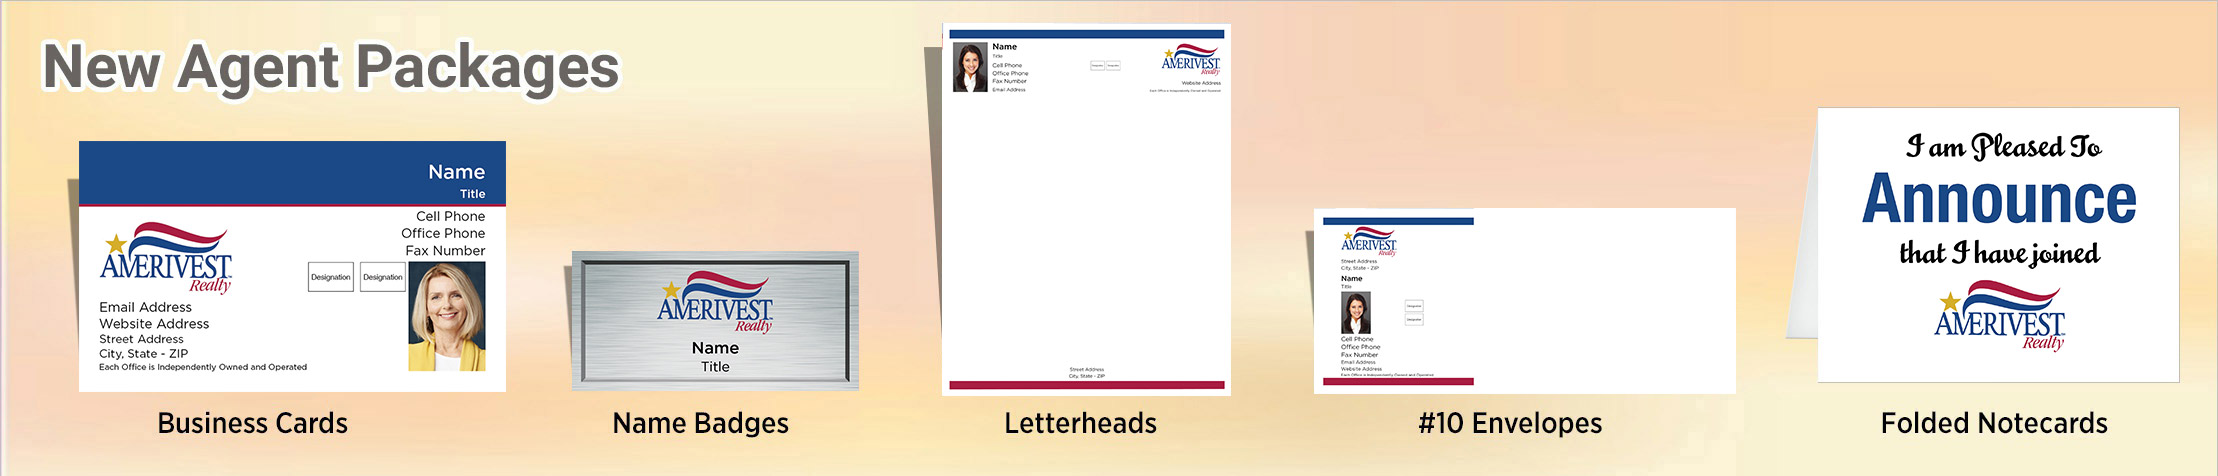 Amerivest Realty Real Estate Gold, Silver and Bronze Agent Packages - Amerivest Realty approved vendor personalized business cards, letterhead, envelopes and note cards | BestPrintBuy.com